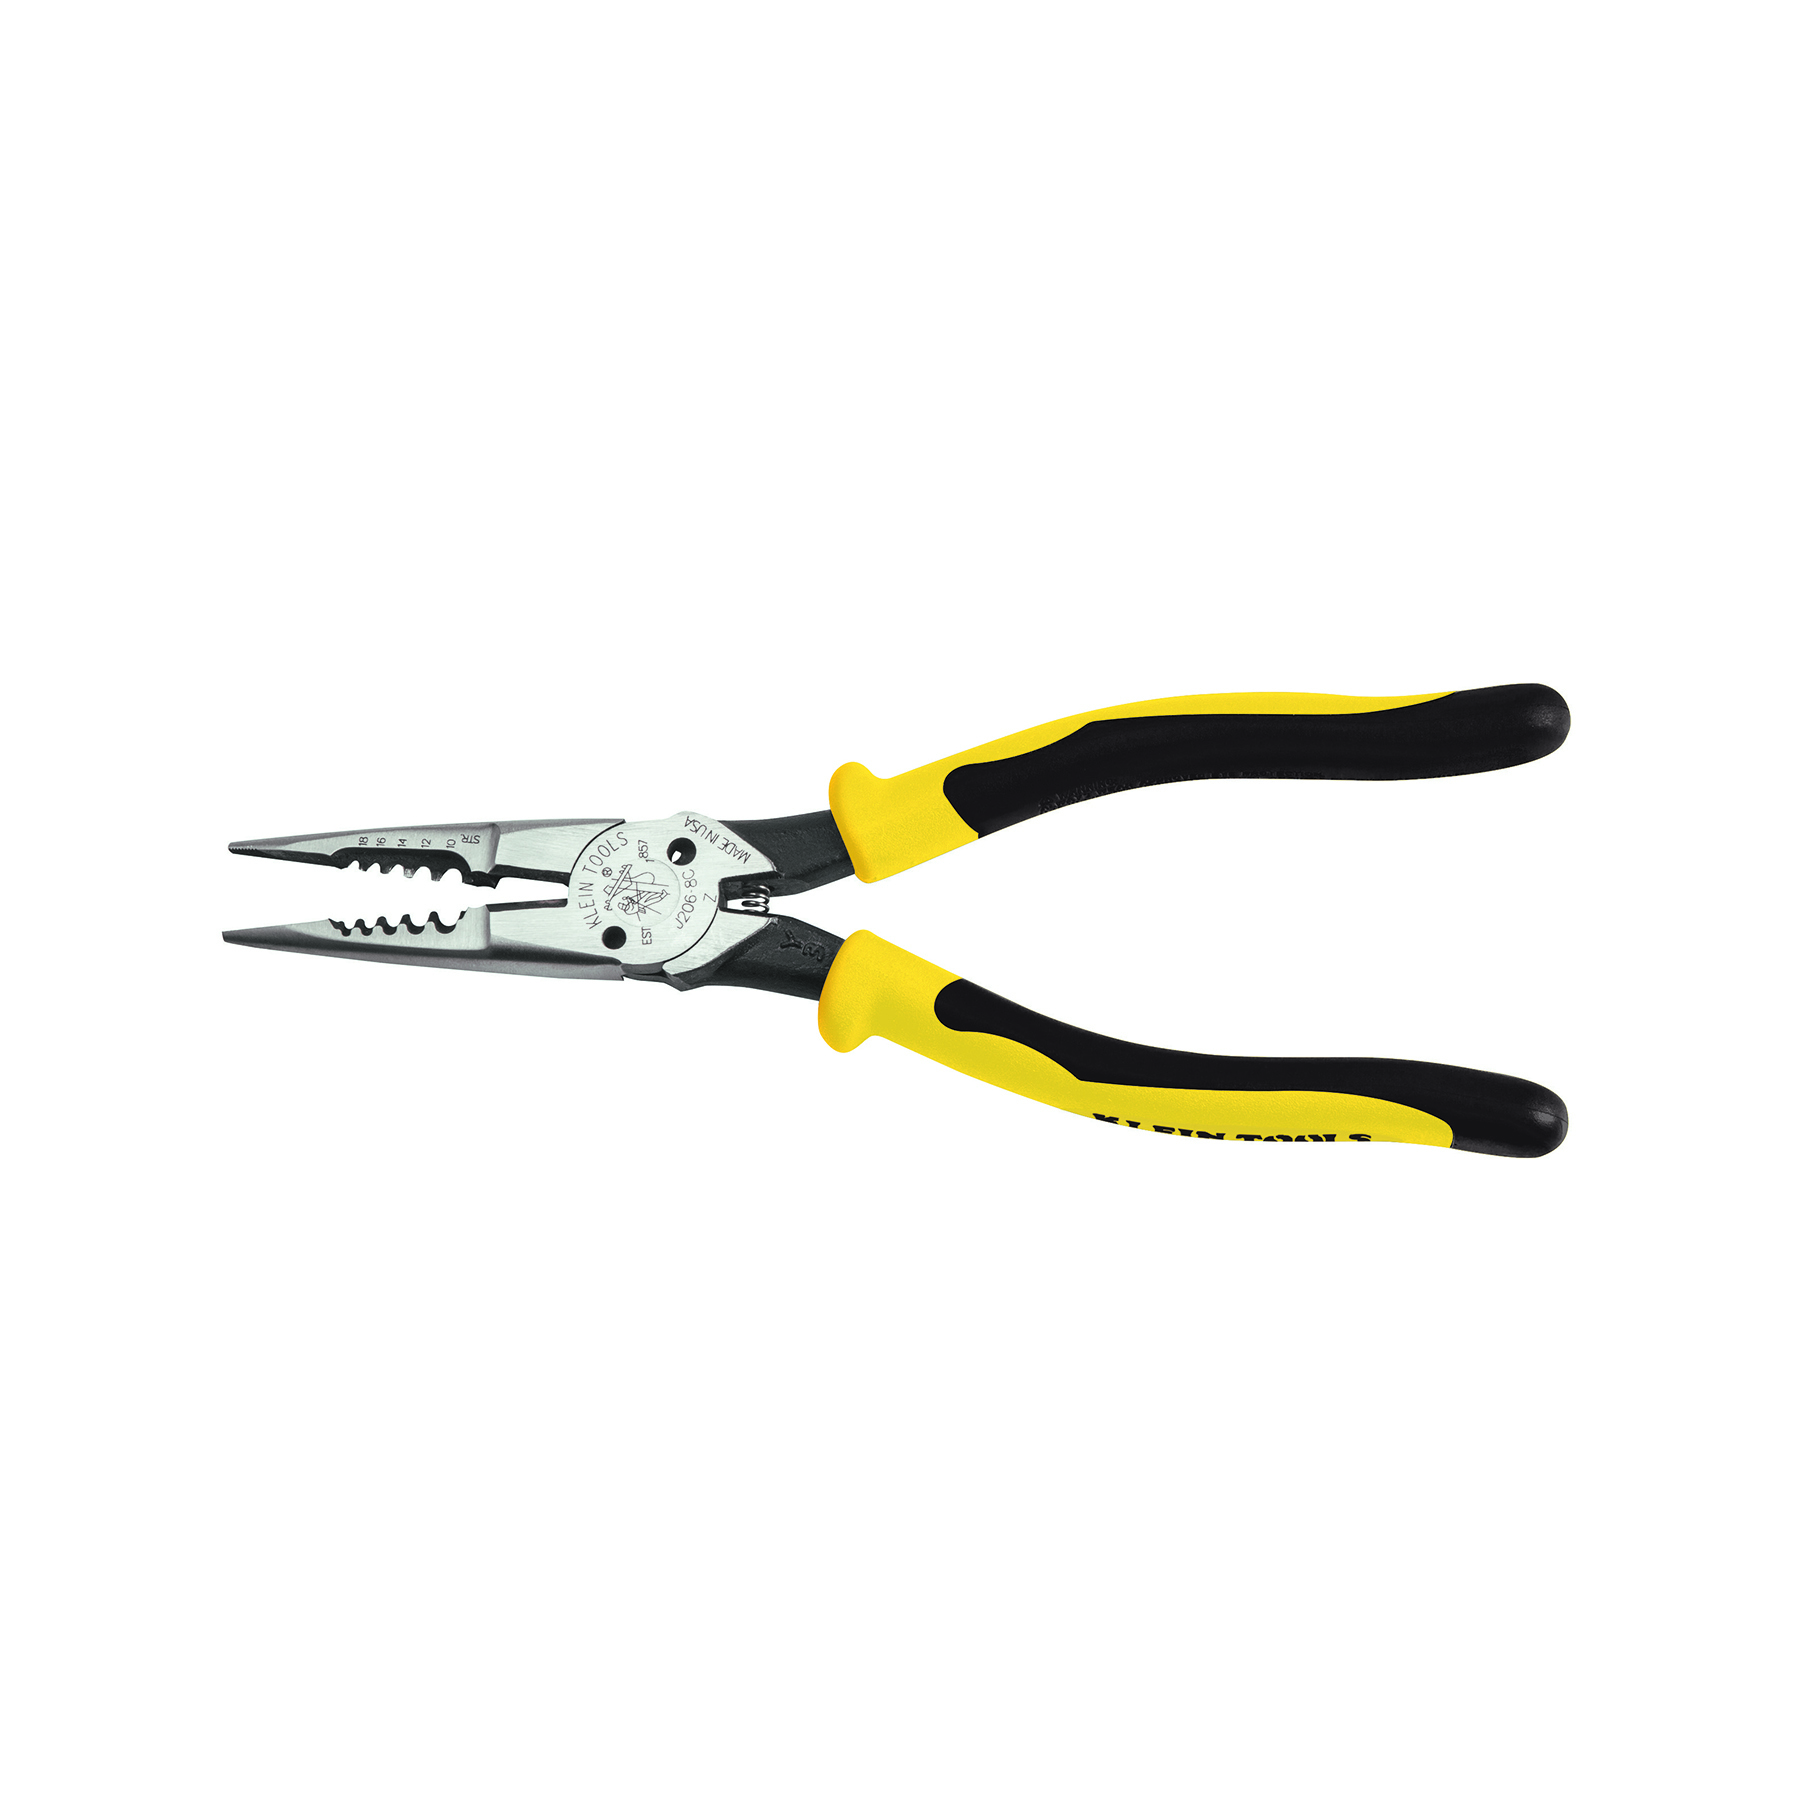 ALL PURPOSE PLIER WITH WIRE STRIPPER